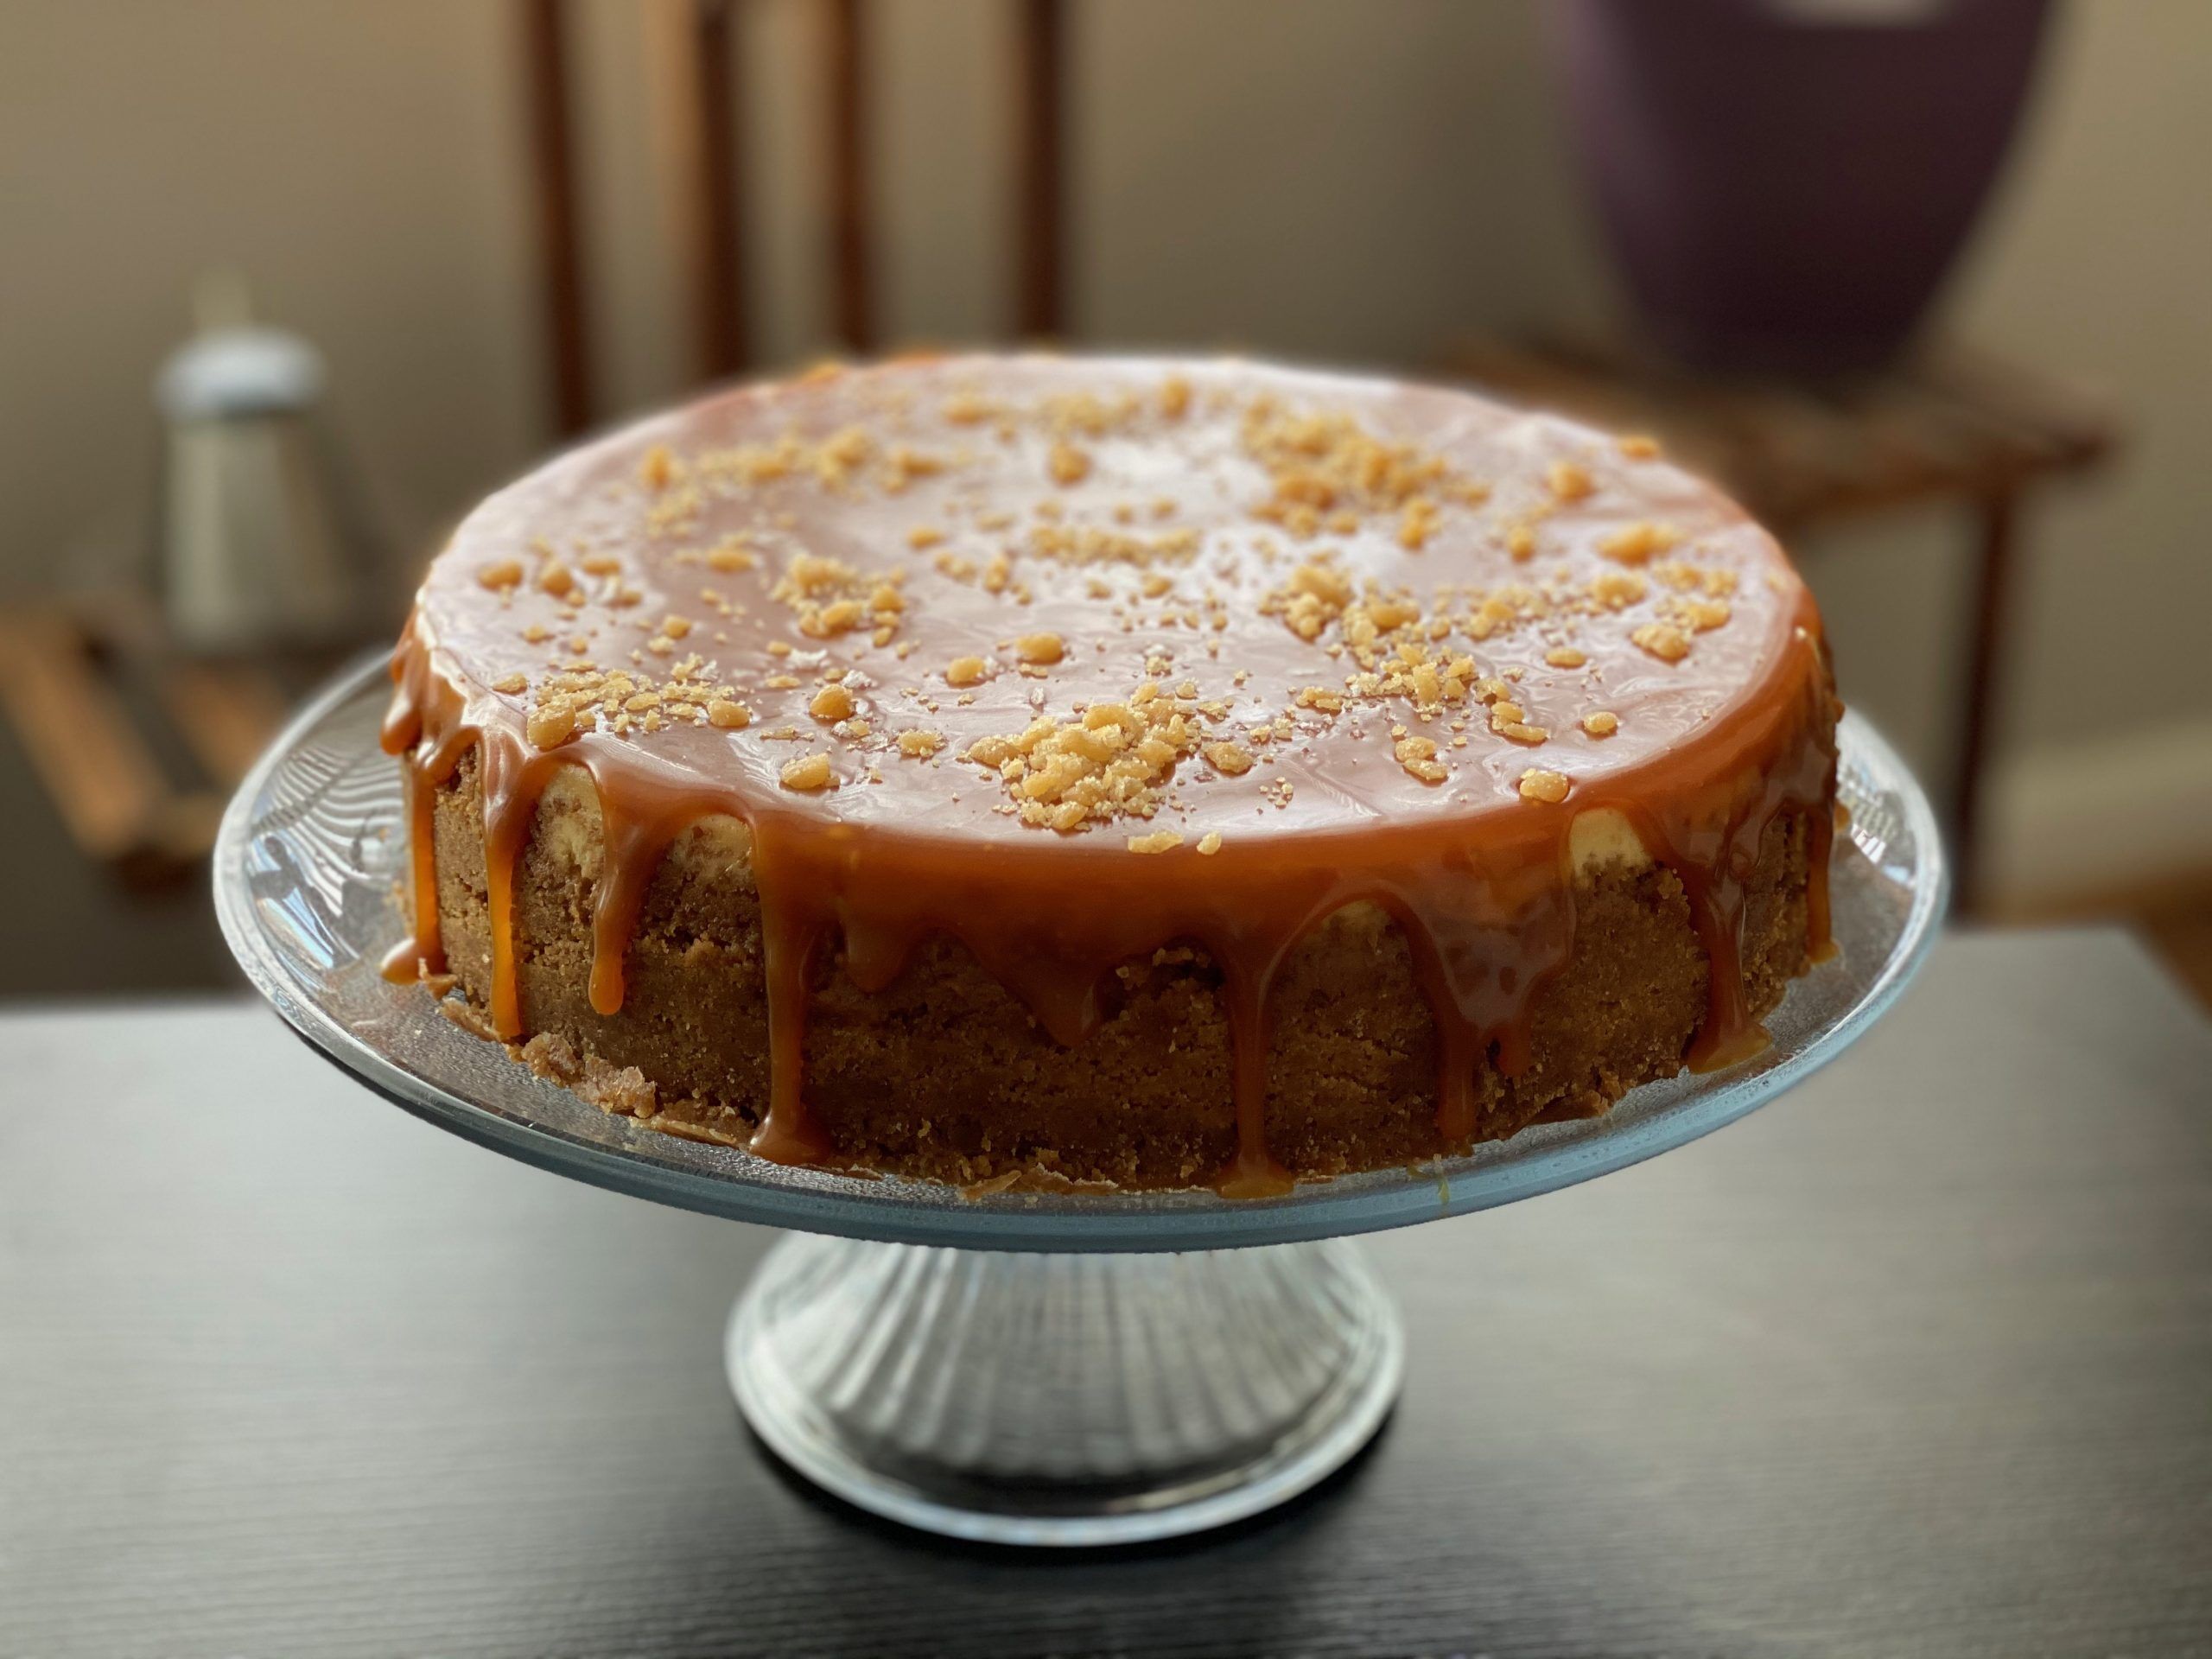 A caramel cheesecake with toffee topping